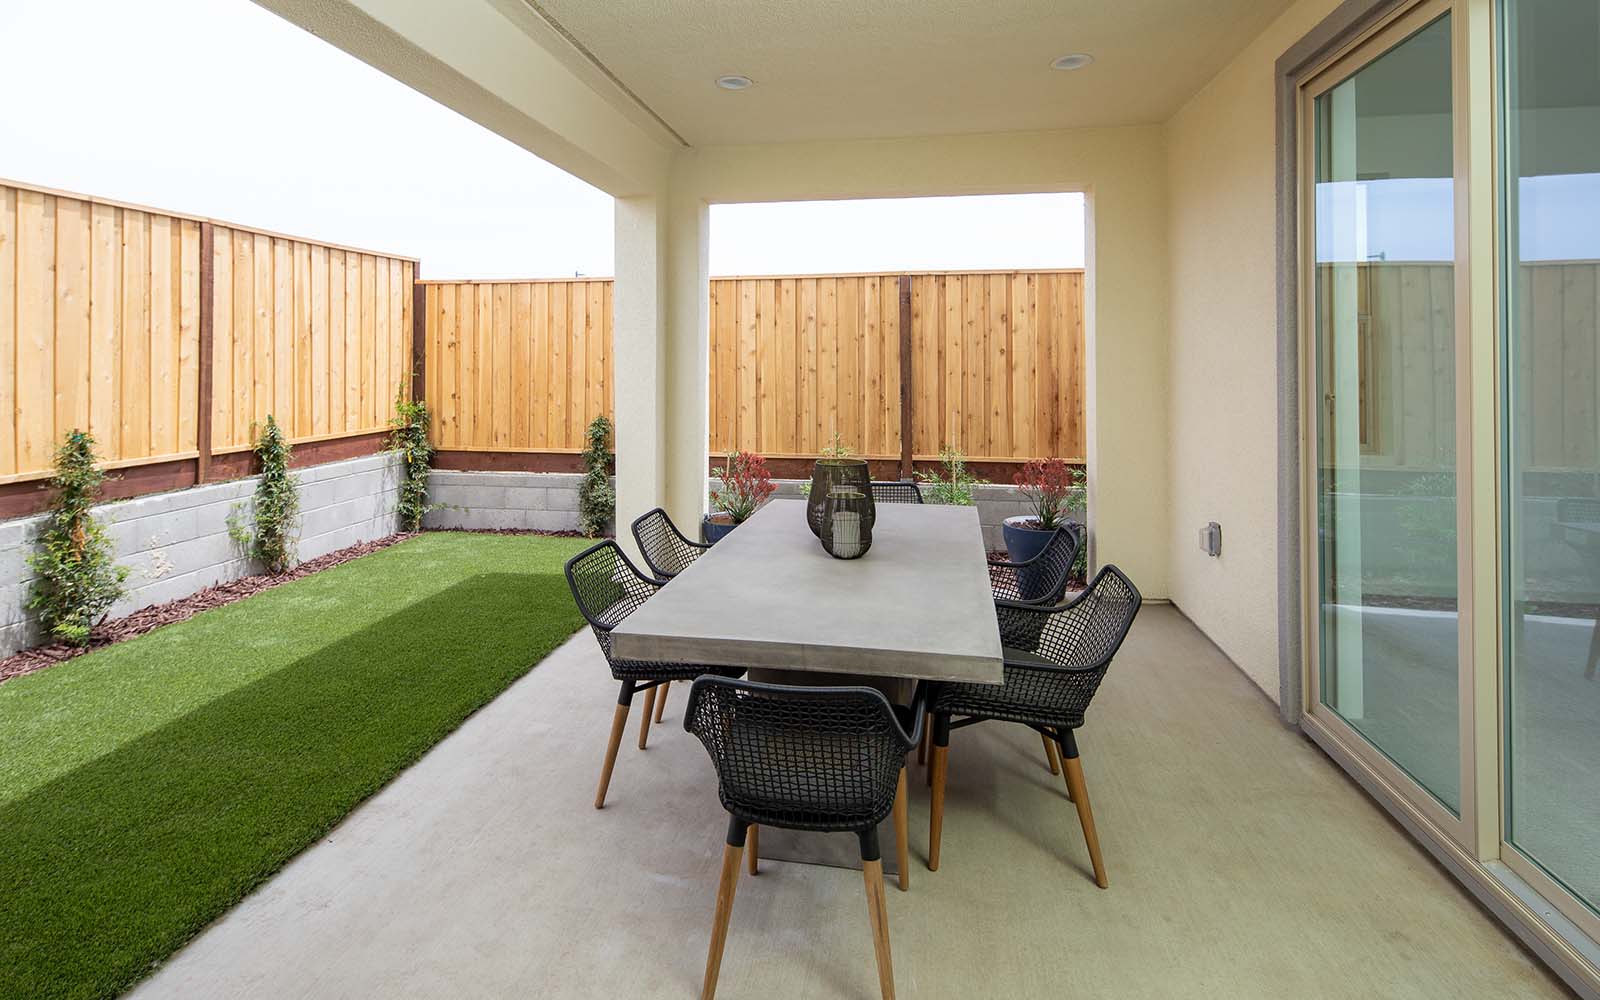 Residence 4 Patio | Melrose at Boulevard in Dublin, CA | Brookfield Residential